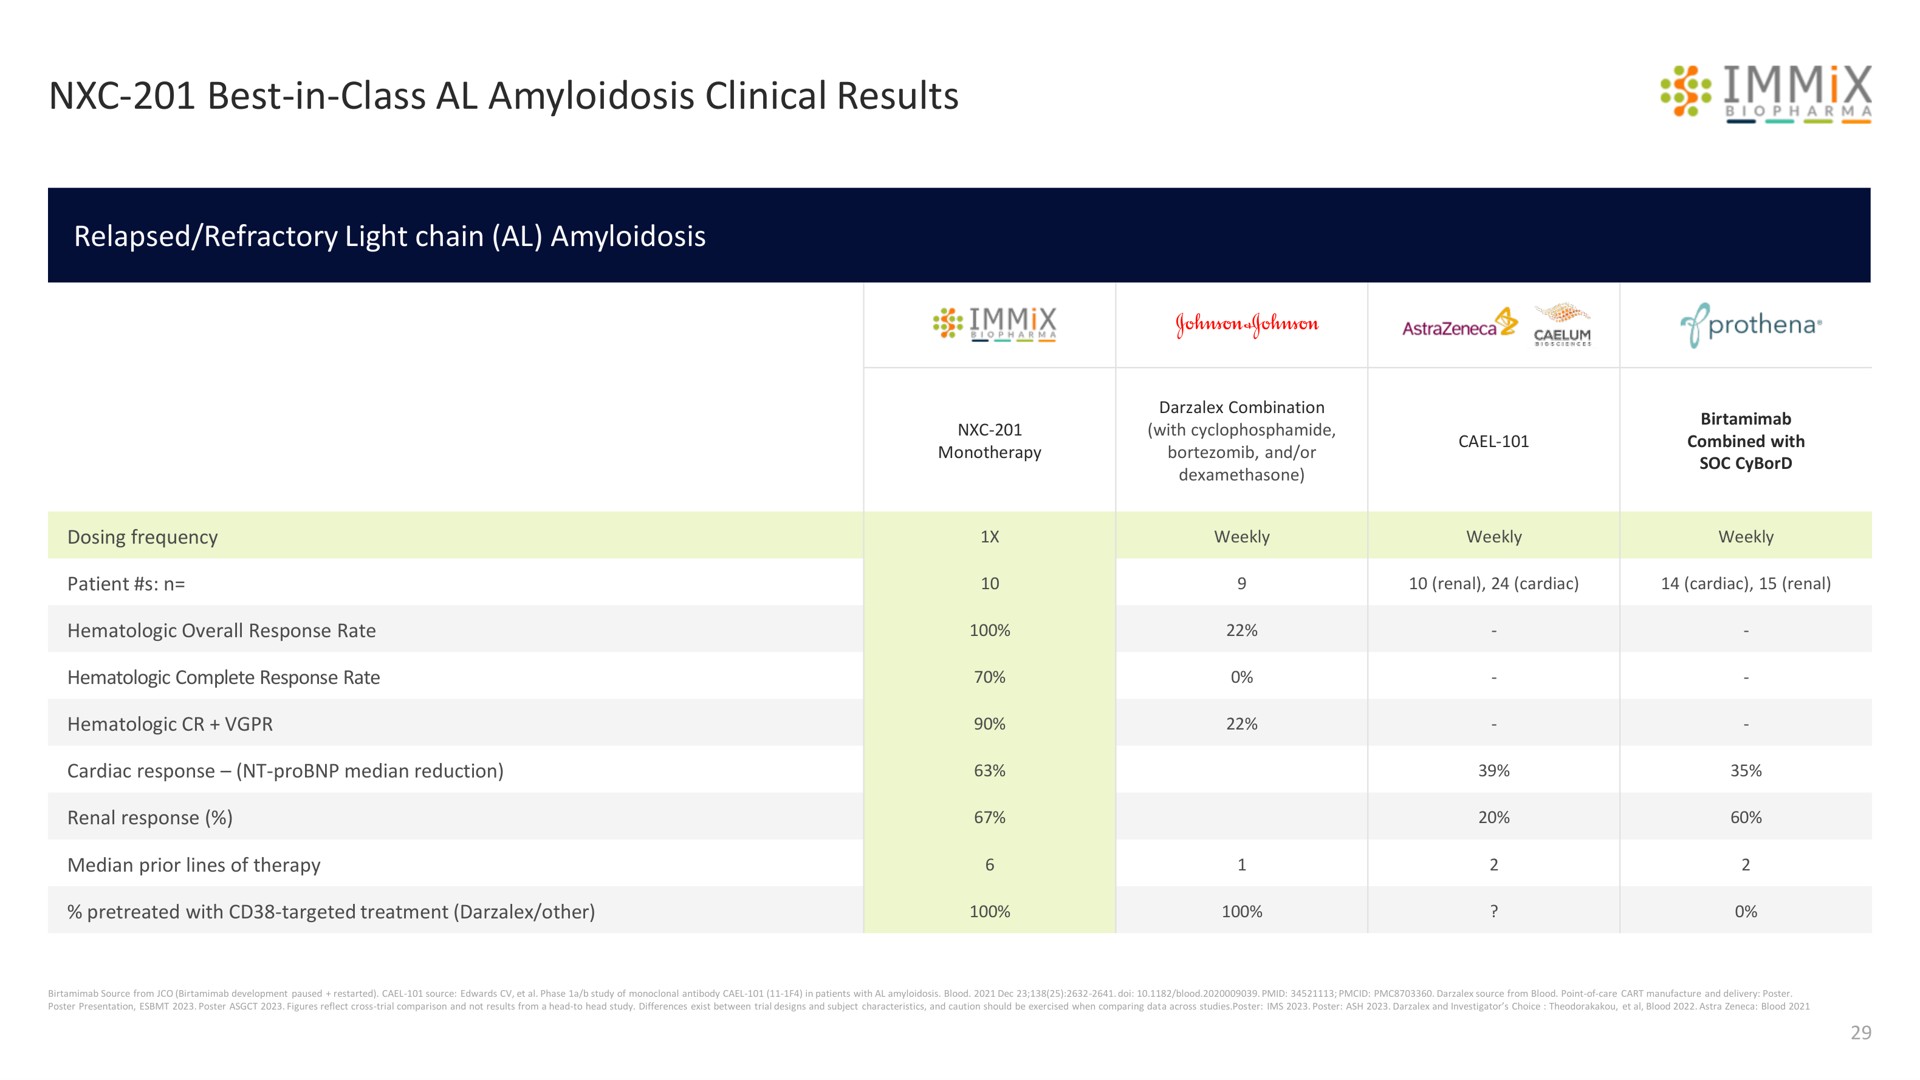 best in class amyloidosis clinical results mix combined | Immix Biopharma